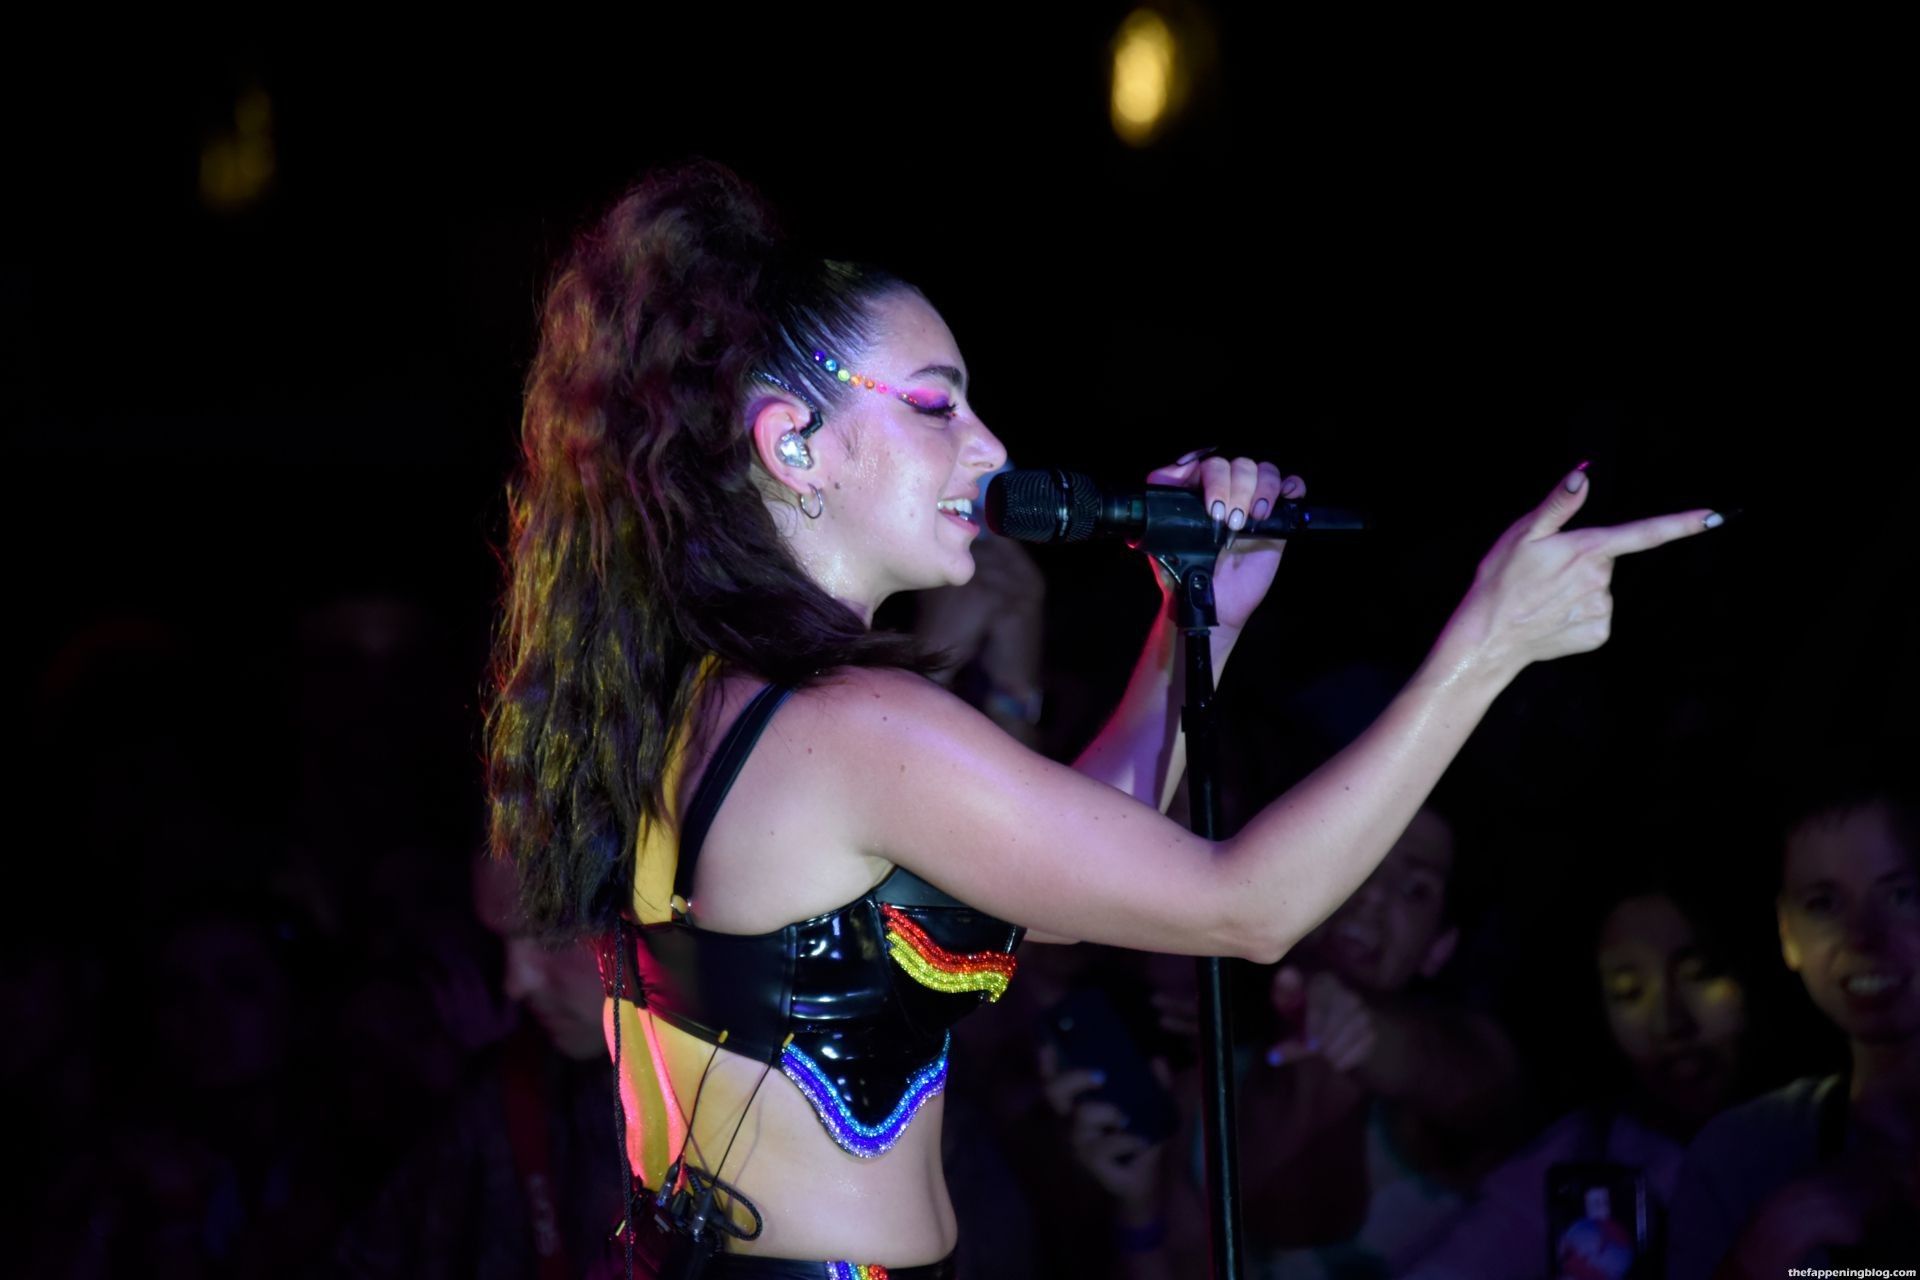 Charli-XCX-Sexy-on-Stage-4-thefappeningblog.com_.jpg